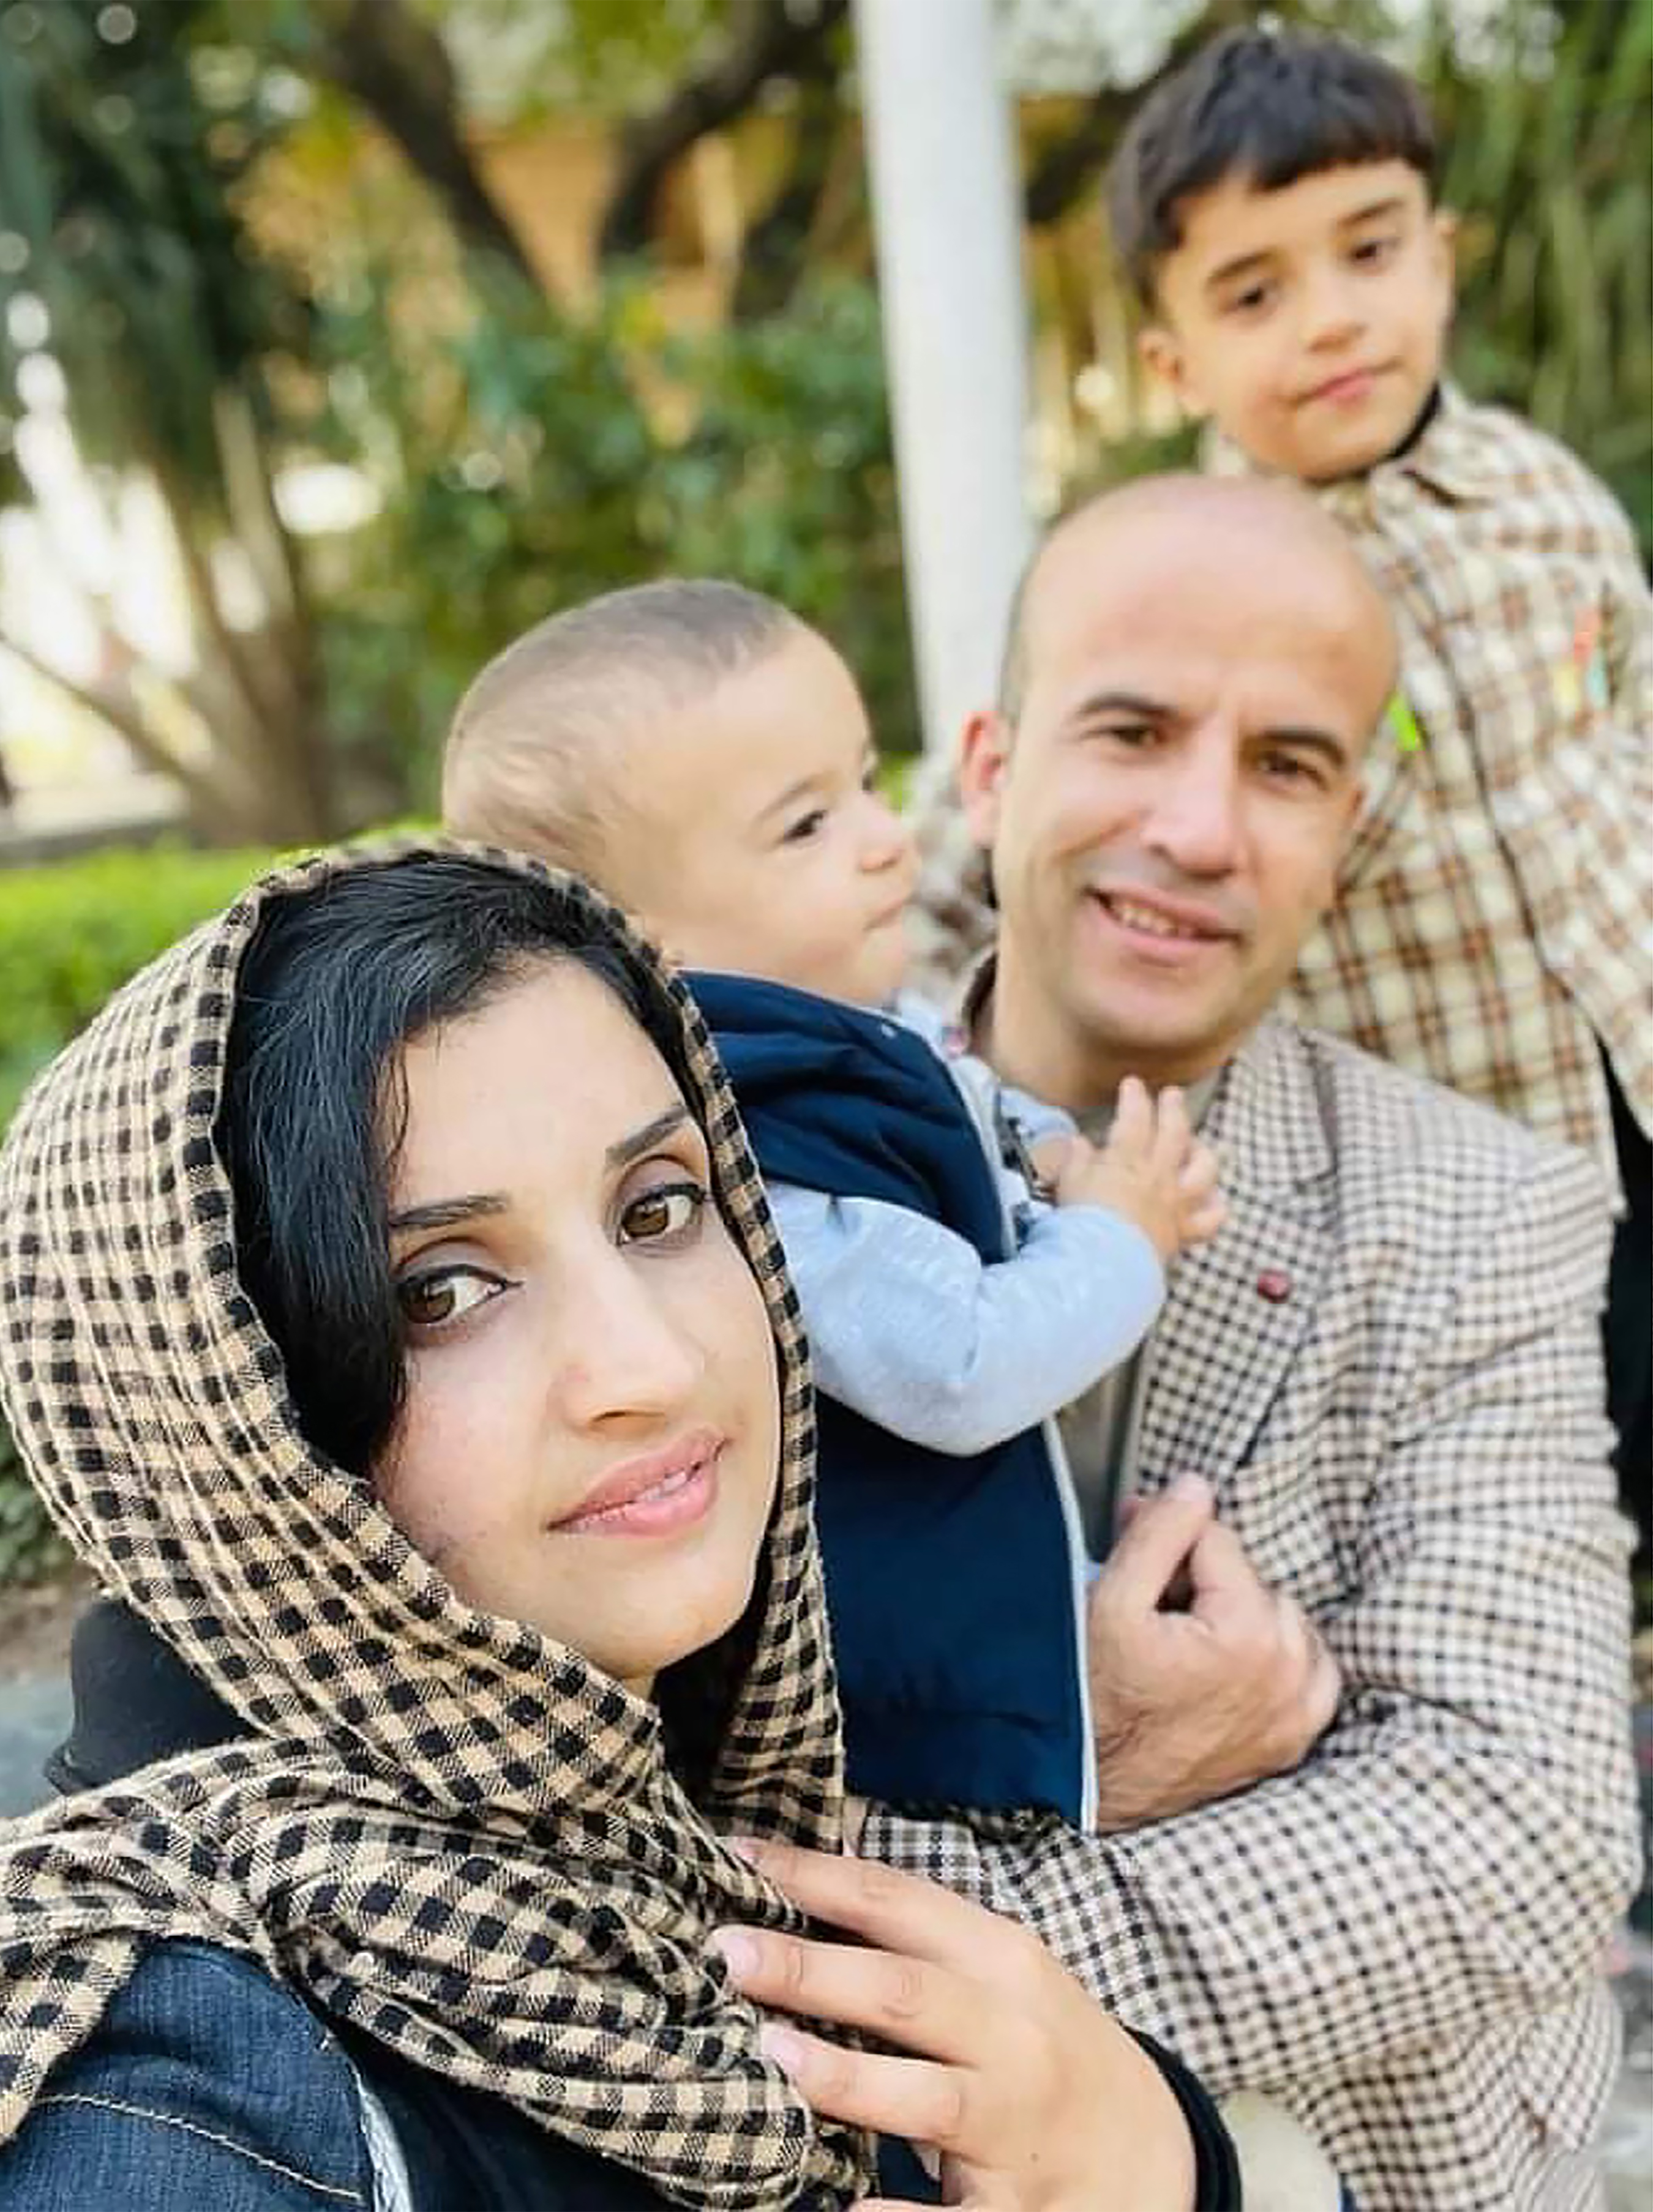 The Sediqi family were safely reunited in Islamabad in September.